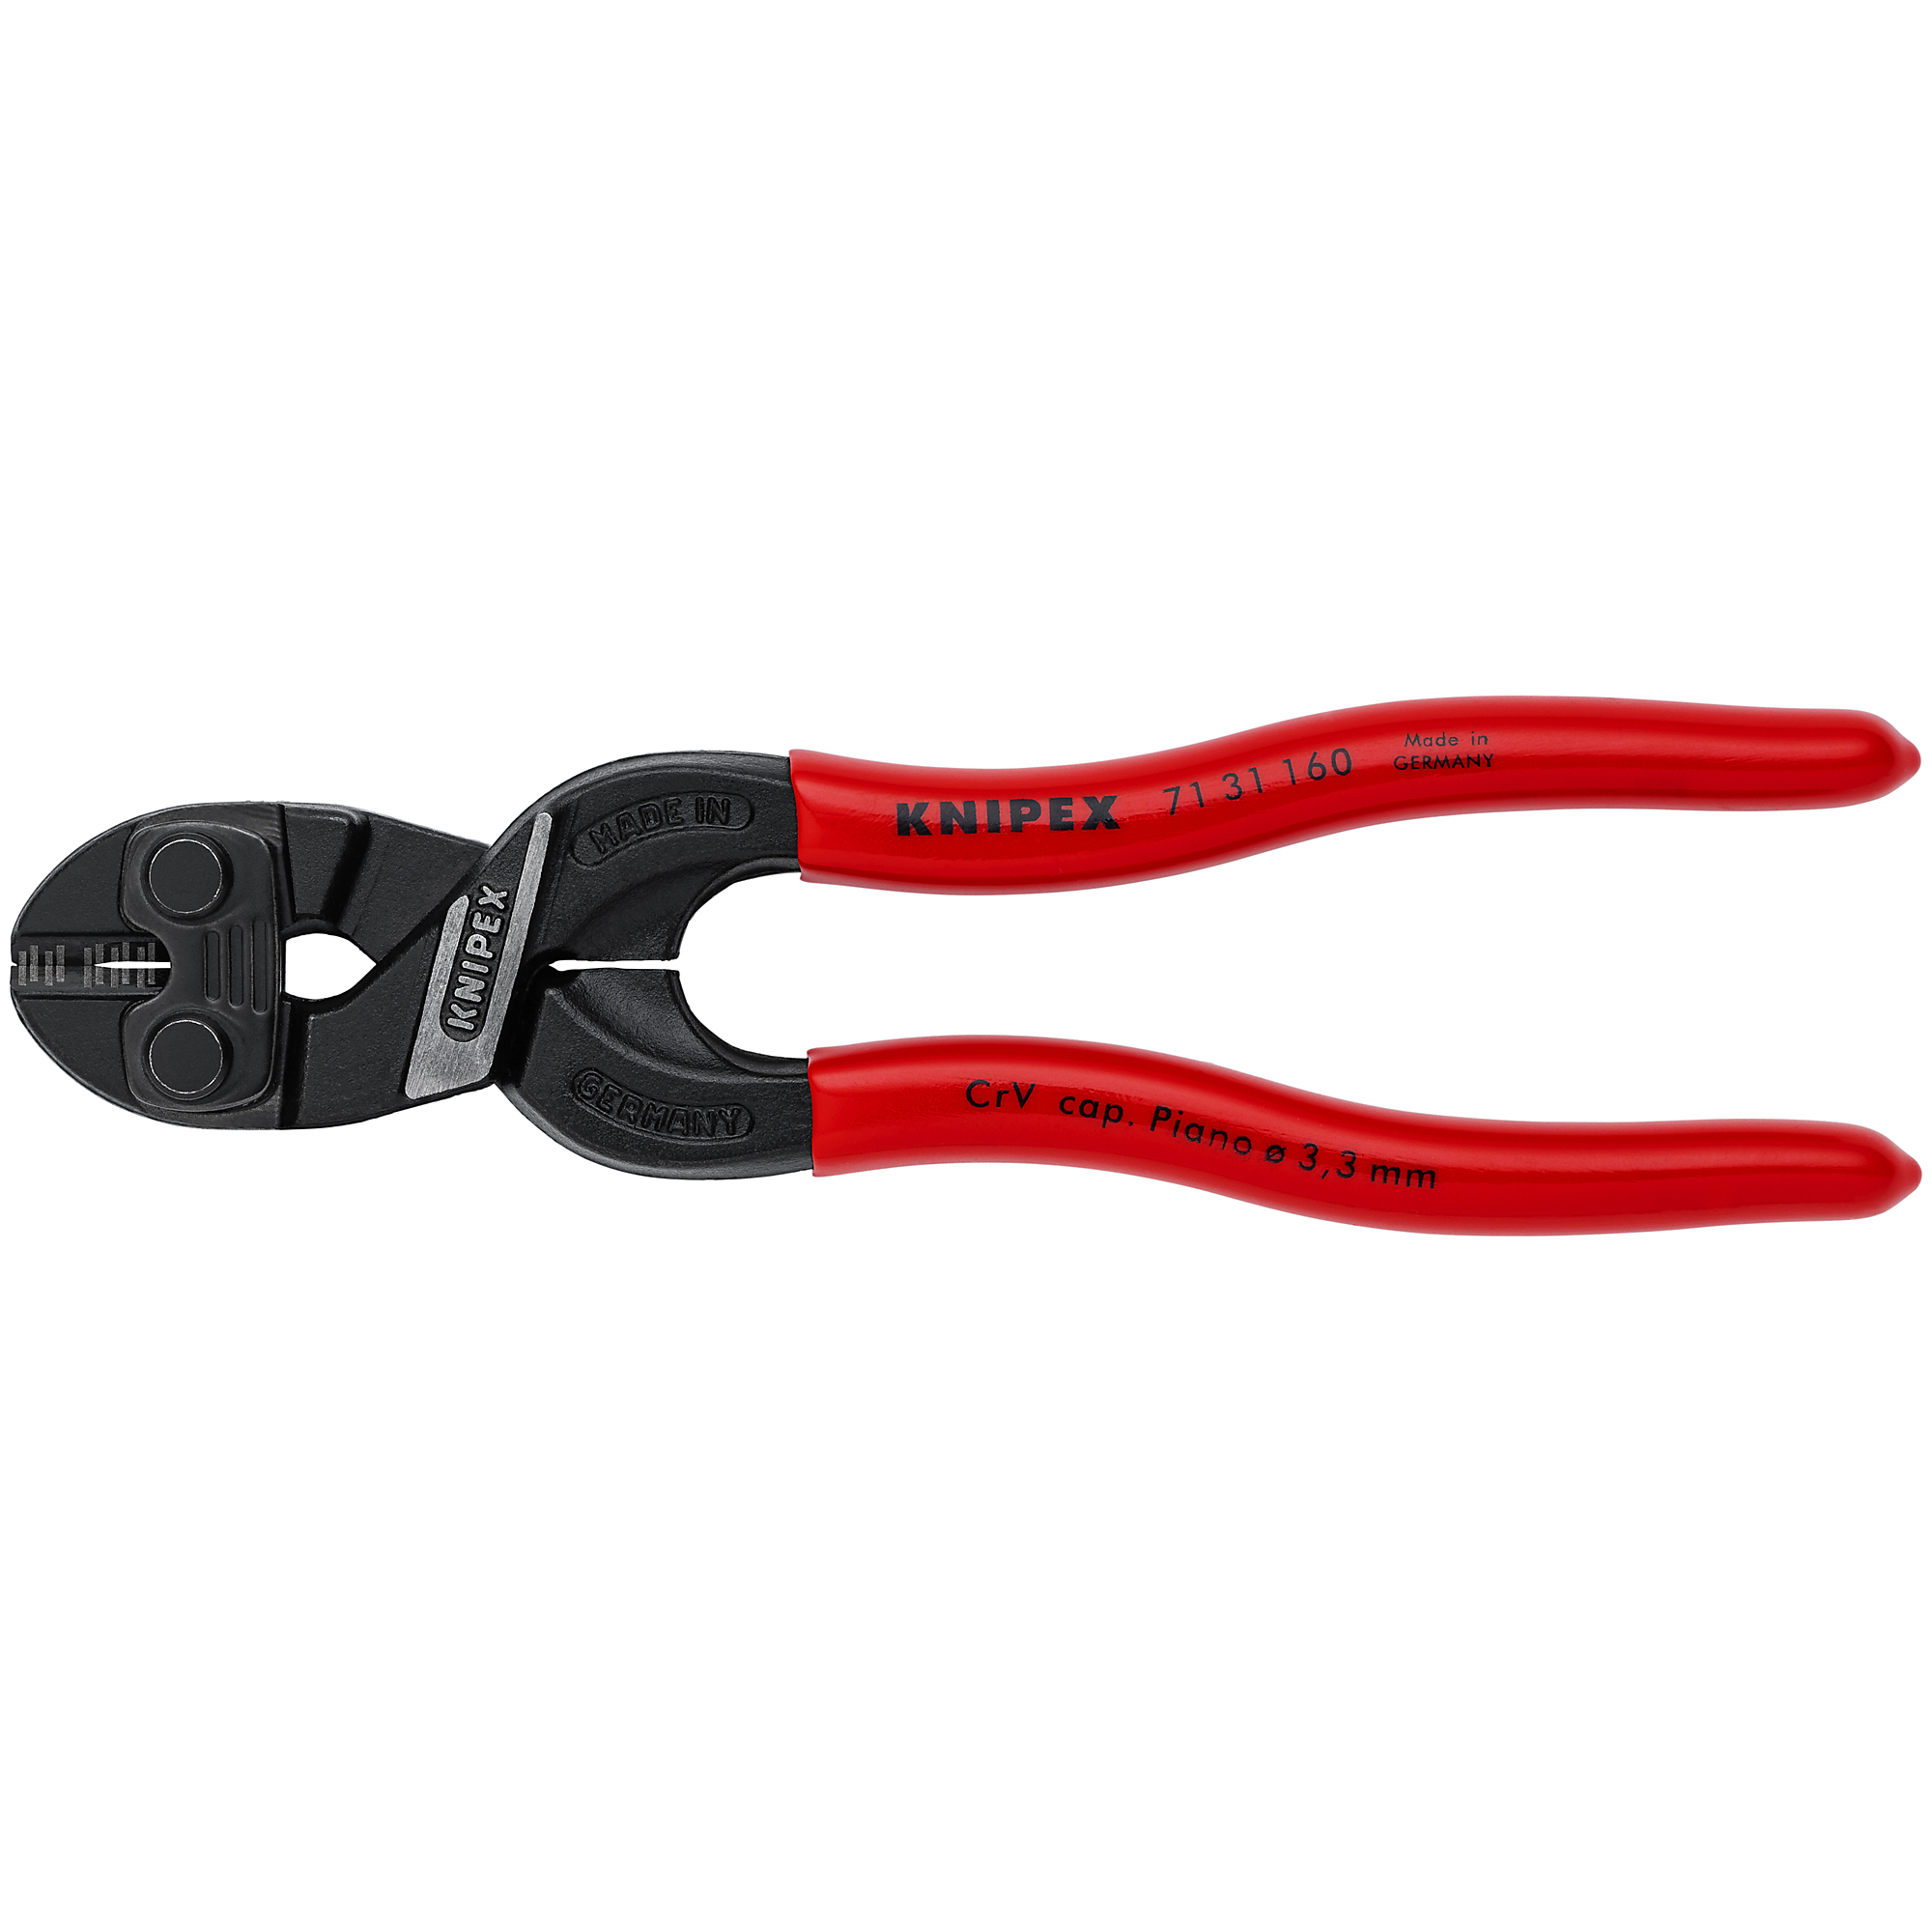 KNIPEX, CoBolt S Bolt Cutters-Notched Blade, 6.25Inch, Tool Length 6.25 in, Jaw Opening 0.25 in, Cutting Capacity 0.203125 in, Model 71 31 160